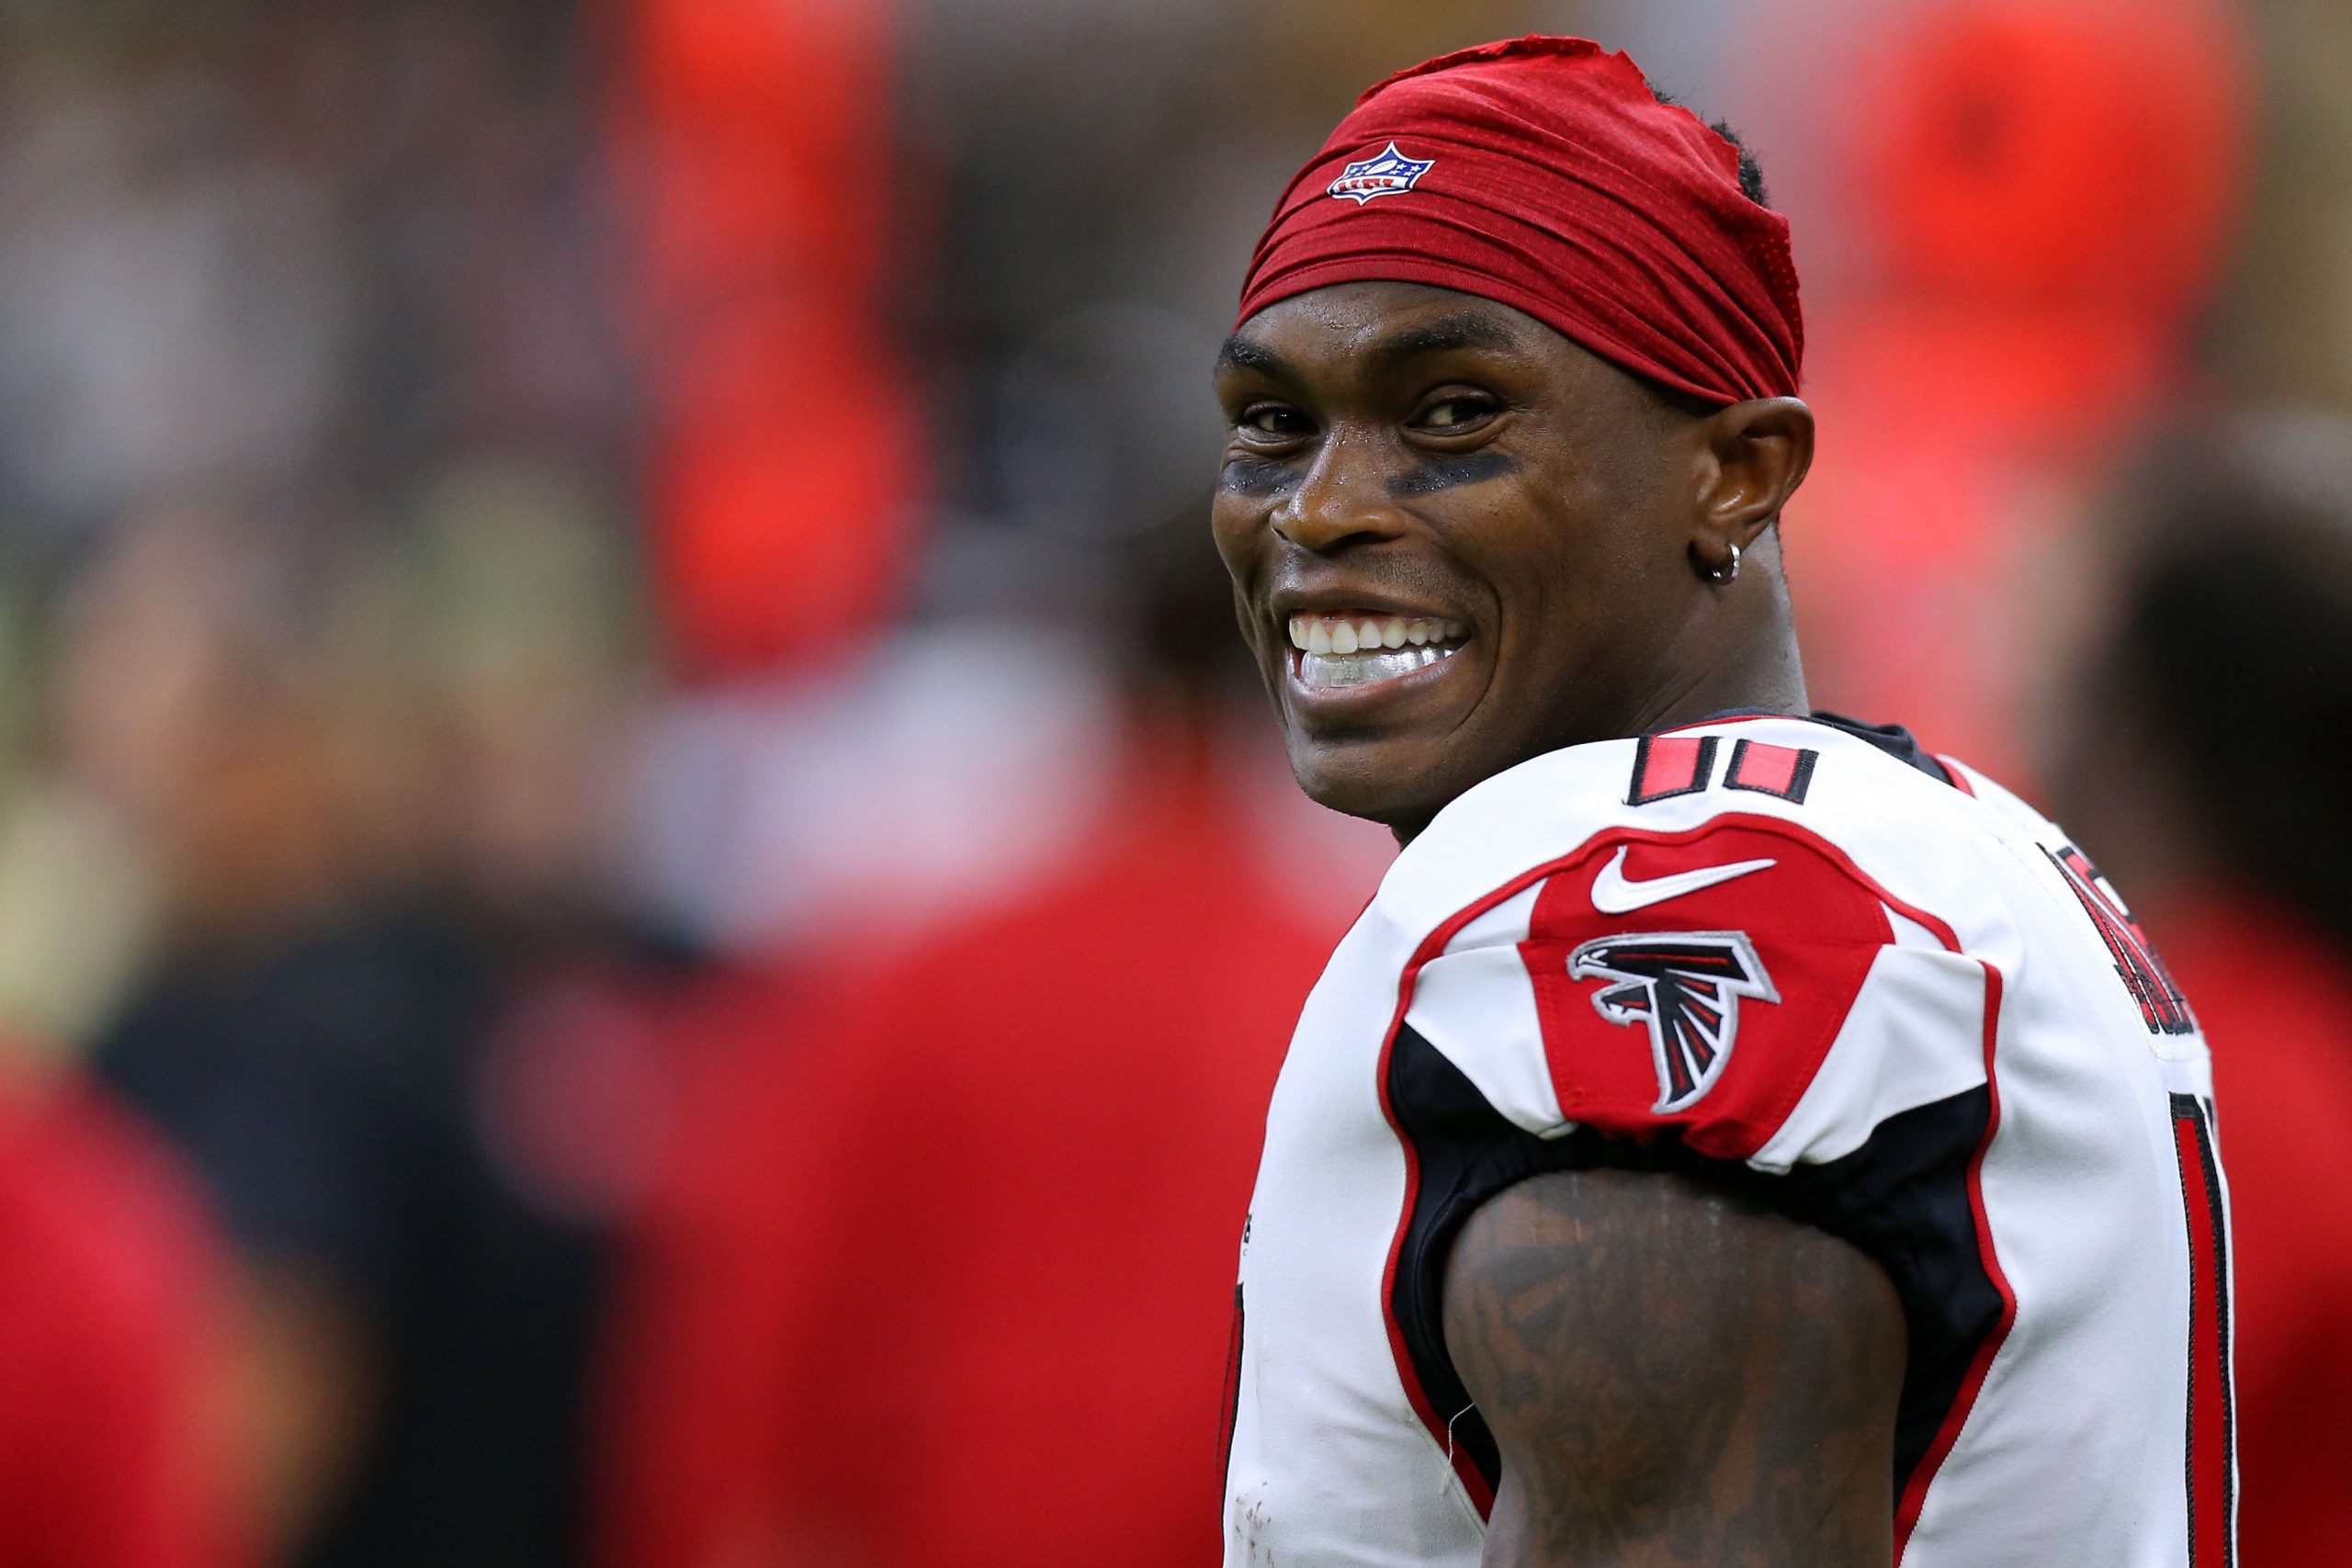 NFL: Titans land star receiver Julio Jones in deal with Falcons. A look at his numbers